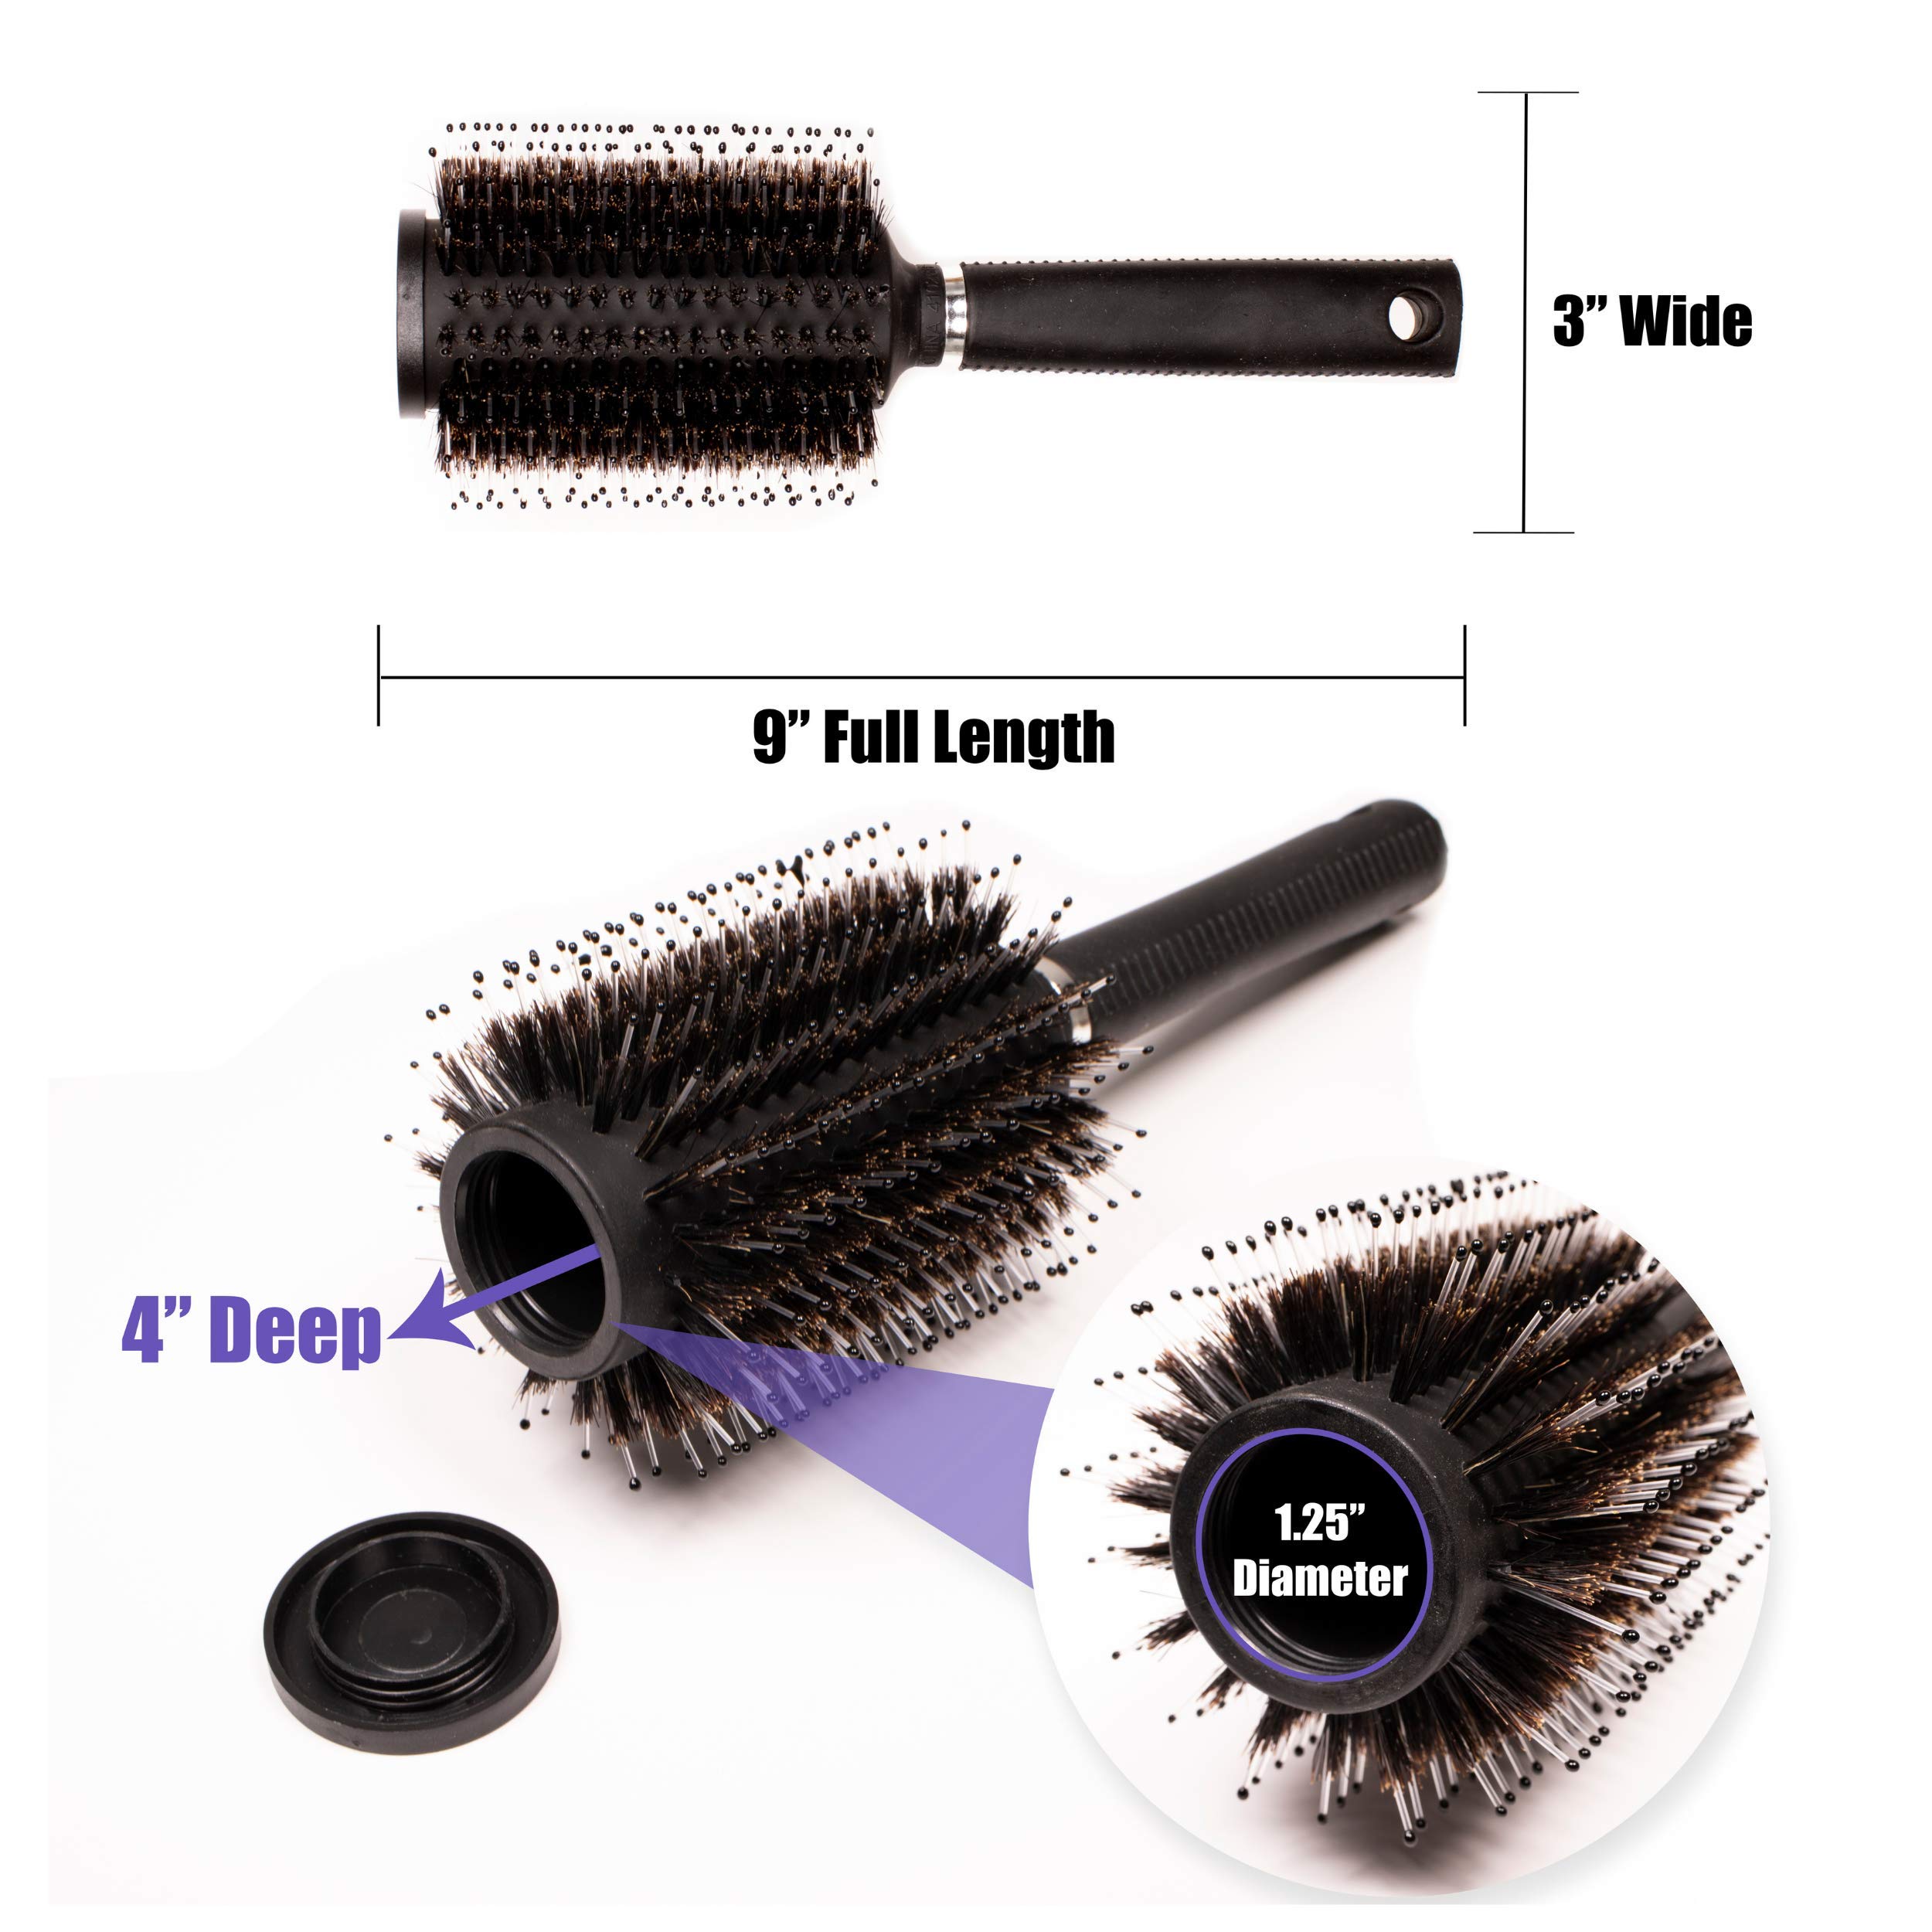 Diversion Safe Hair Brush by Stash-it, Can Safe to Hide Money, Jewelry, or Valuables with Discreet Secret Removable Lid and, New Version